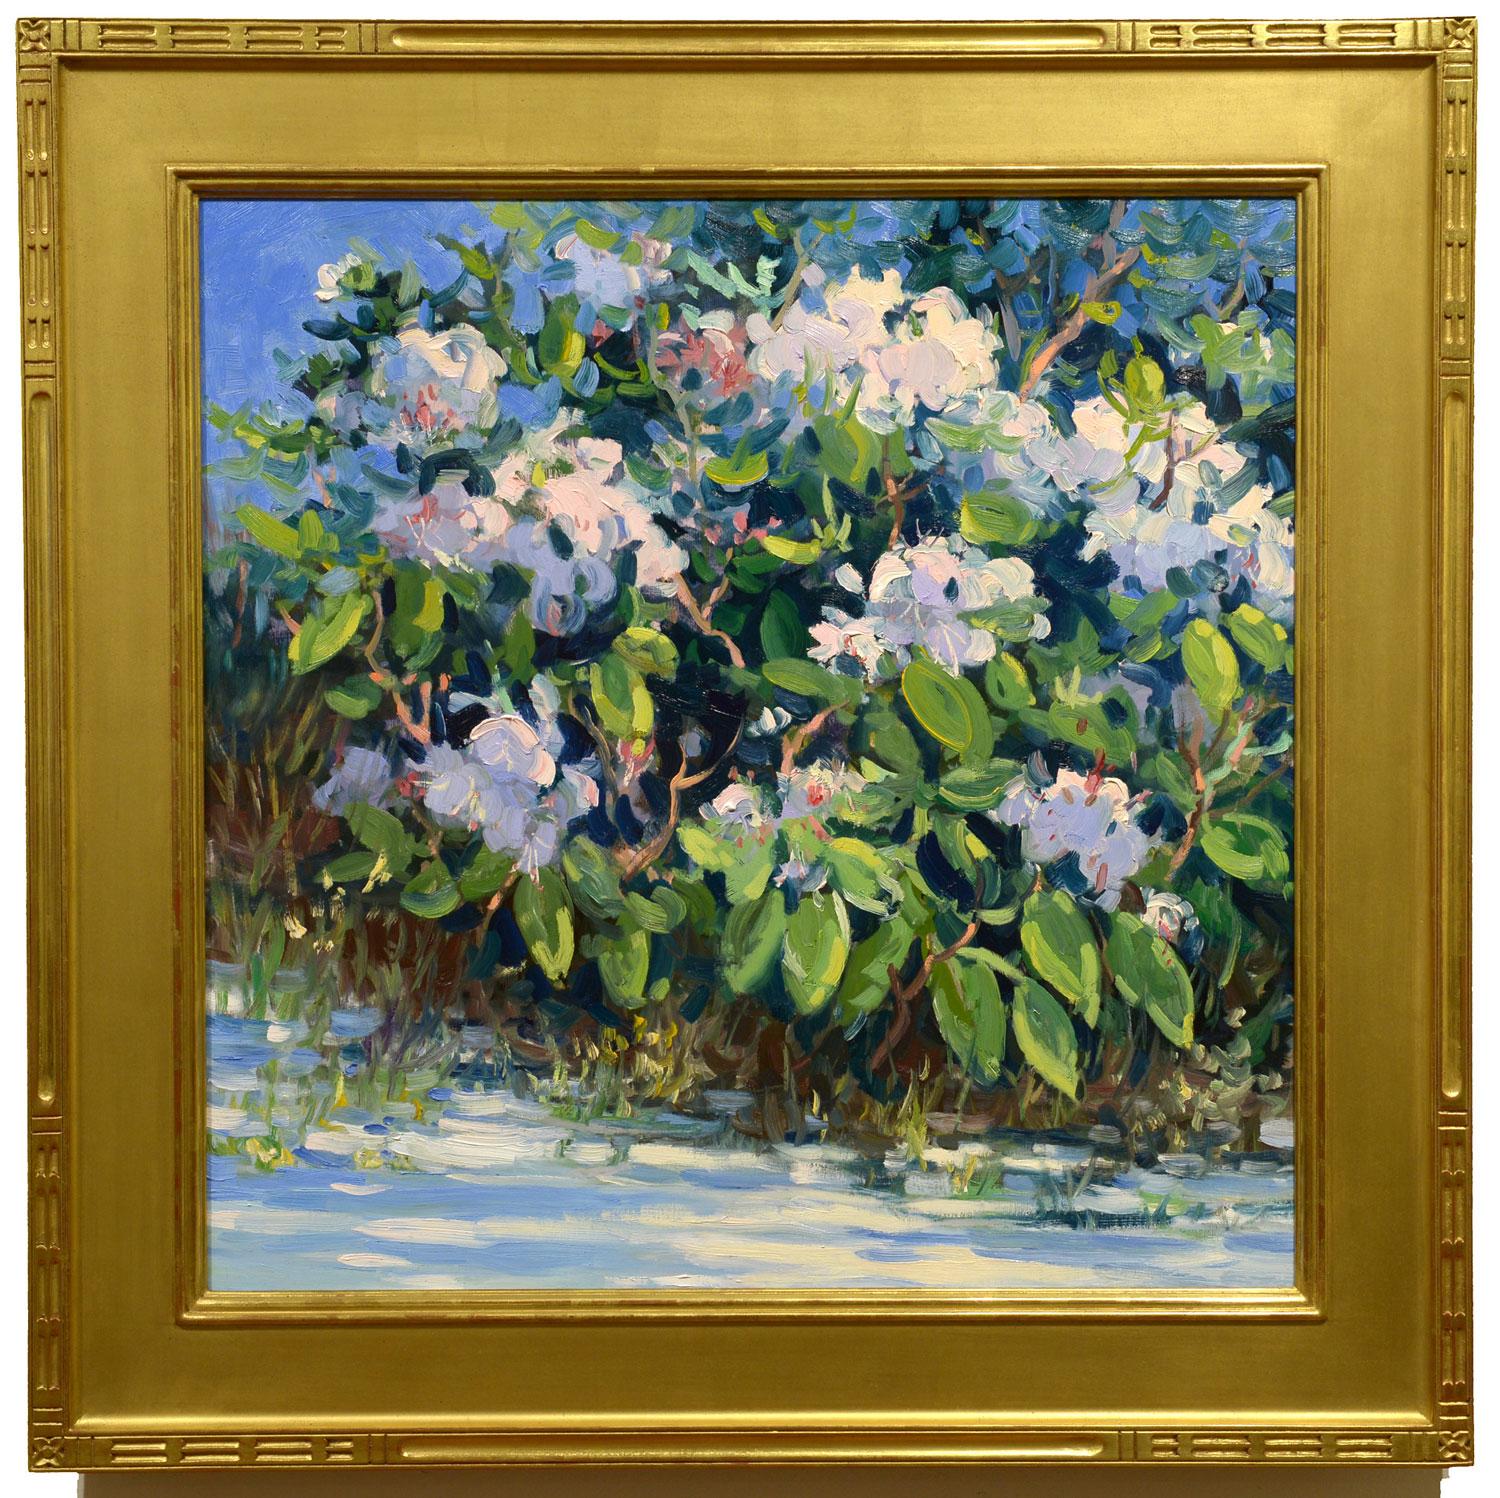 Rhododendron - Painting by Keith Oehmig